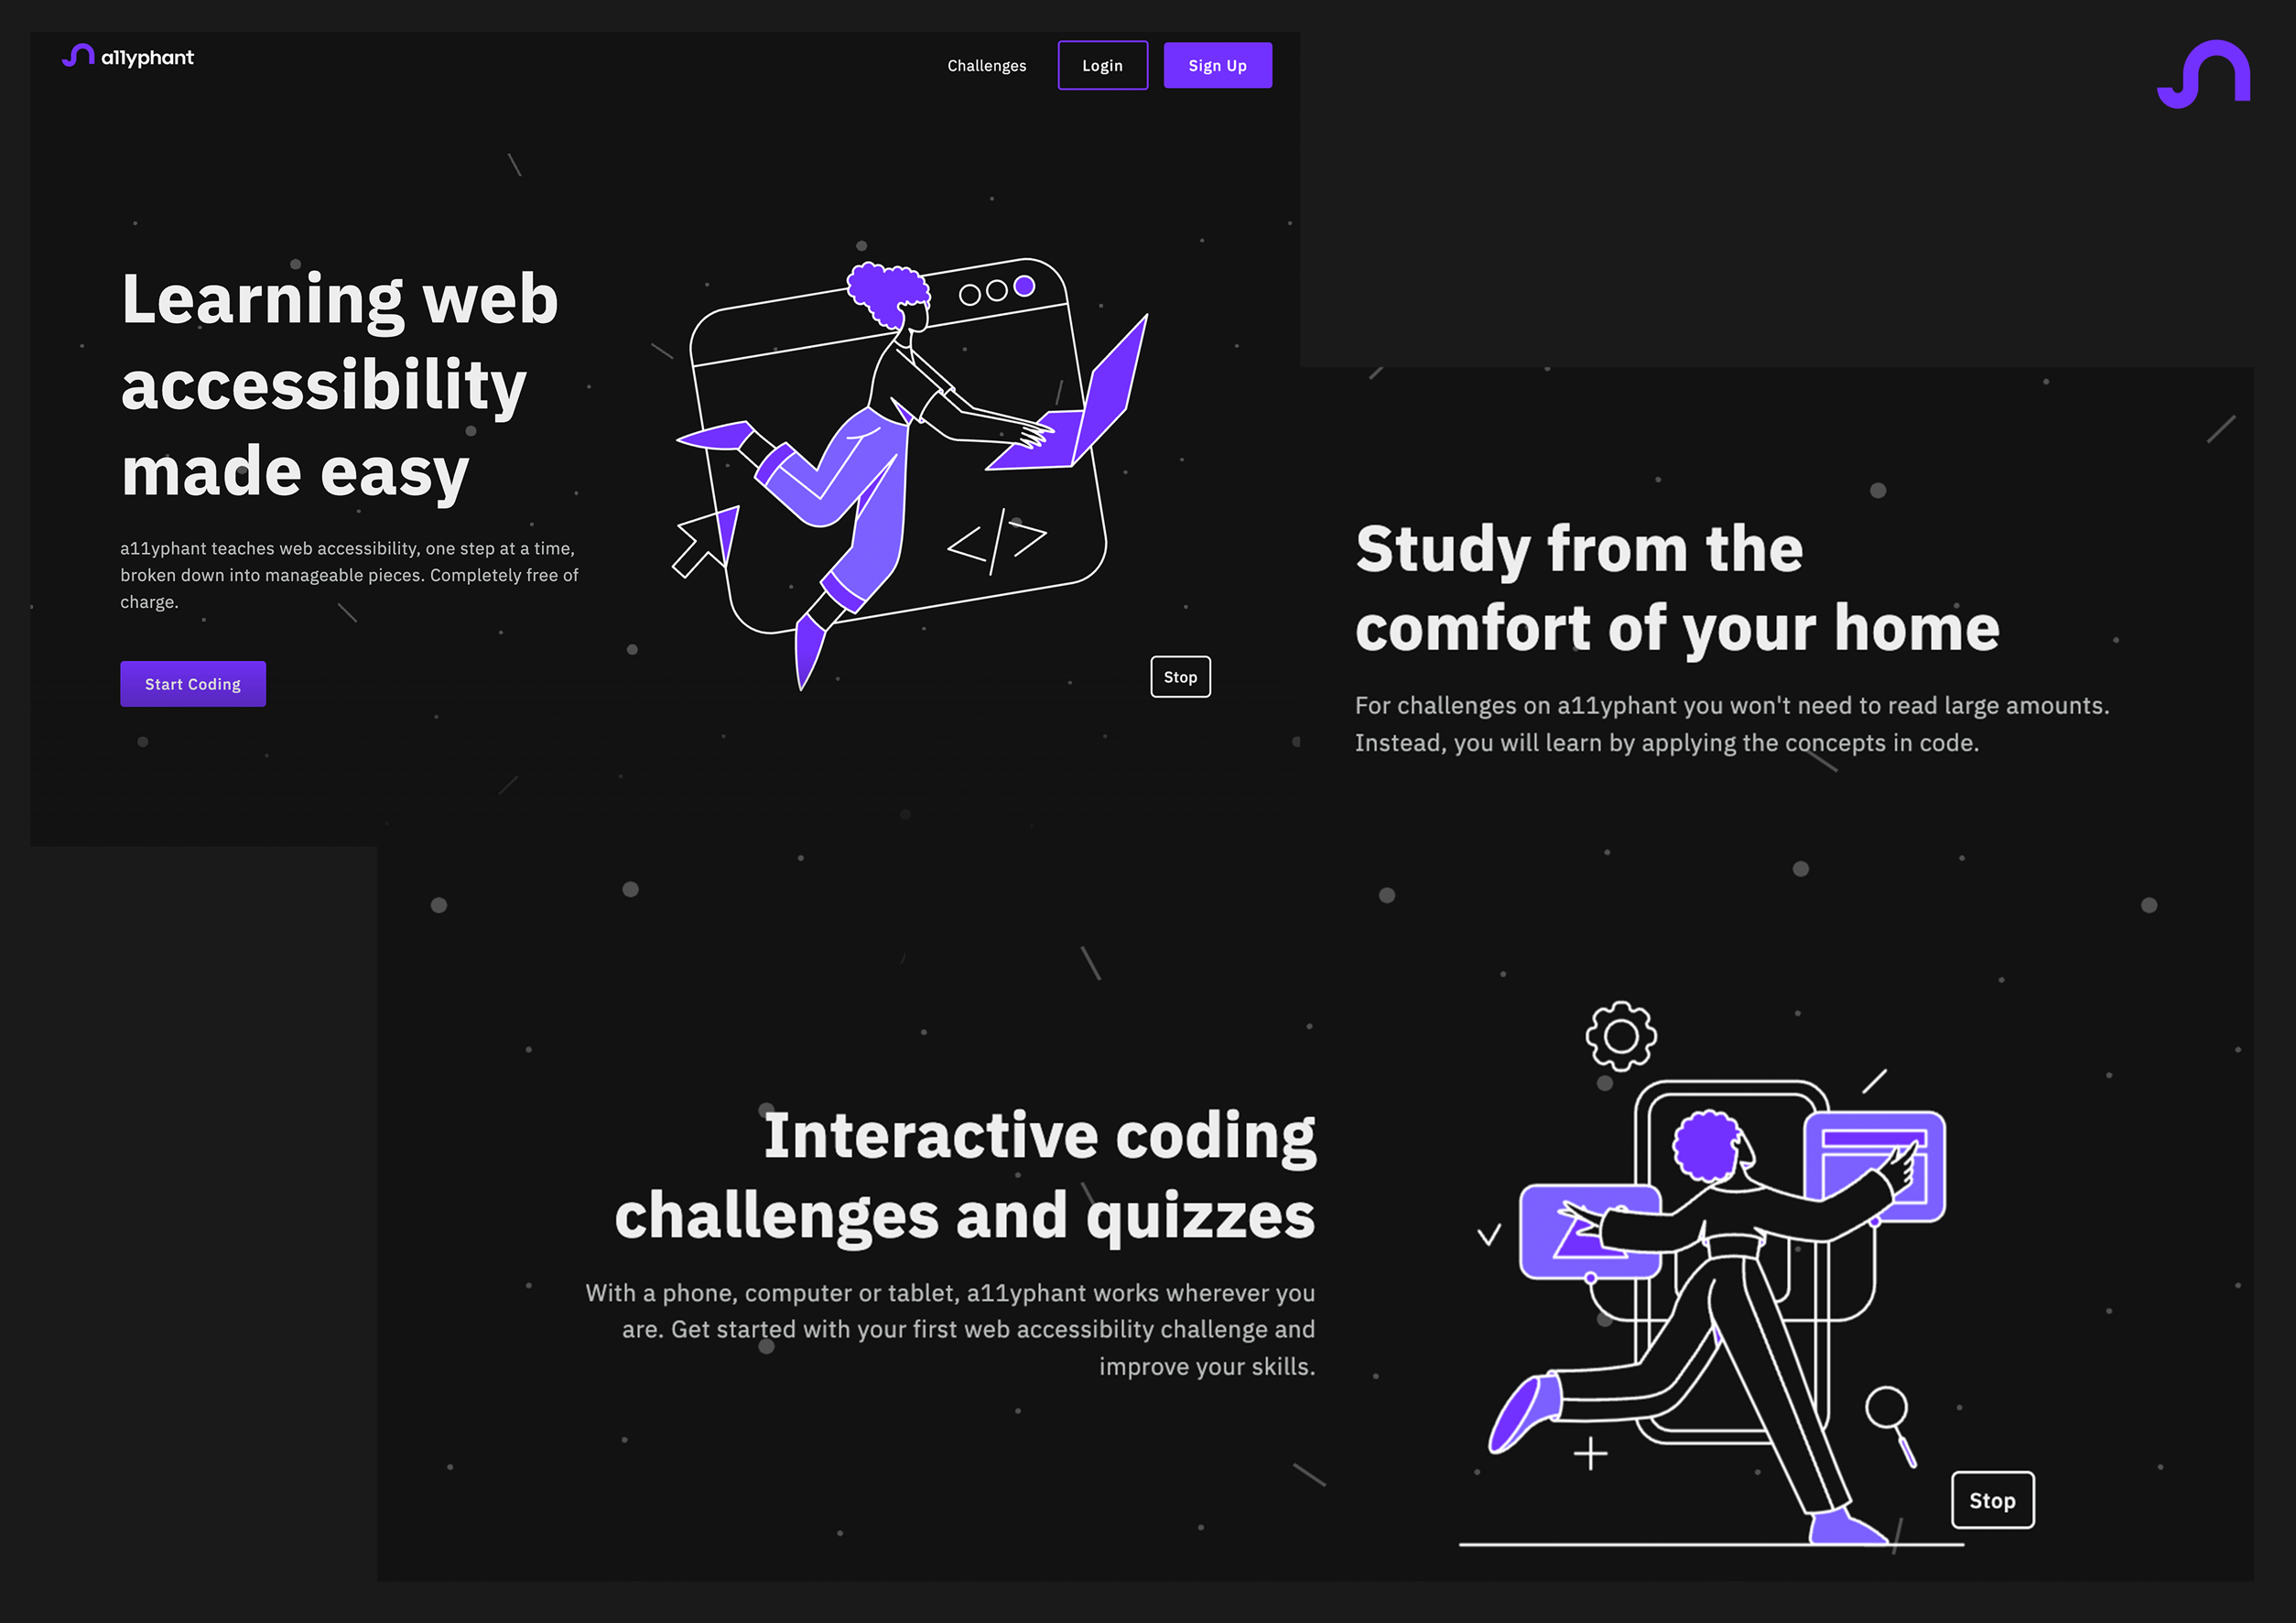 Illustrations of people coding along with a textual description of a11ypahnt's benefits, which are studying from the comfort of your home and interactive coding challenges and quizzes.